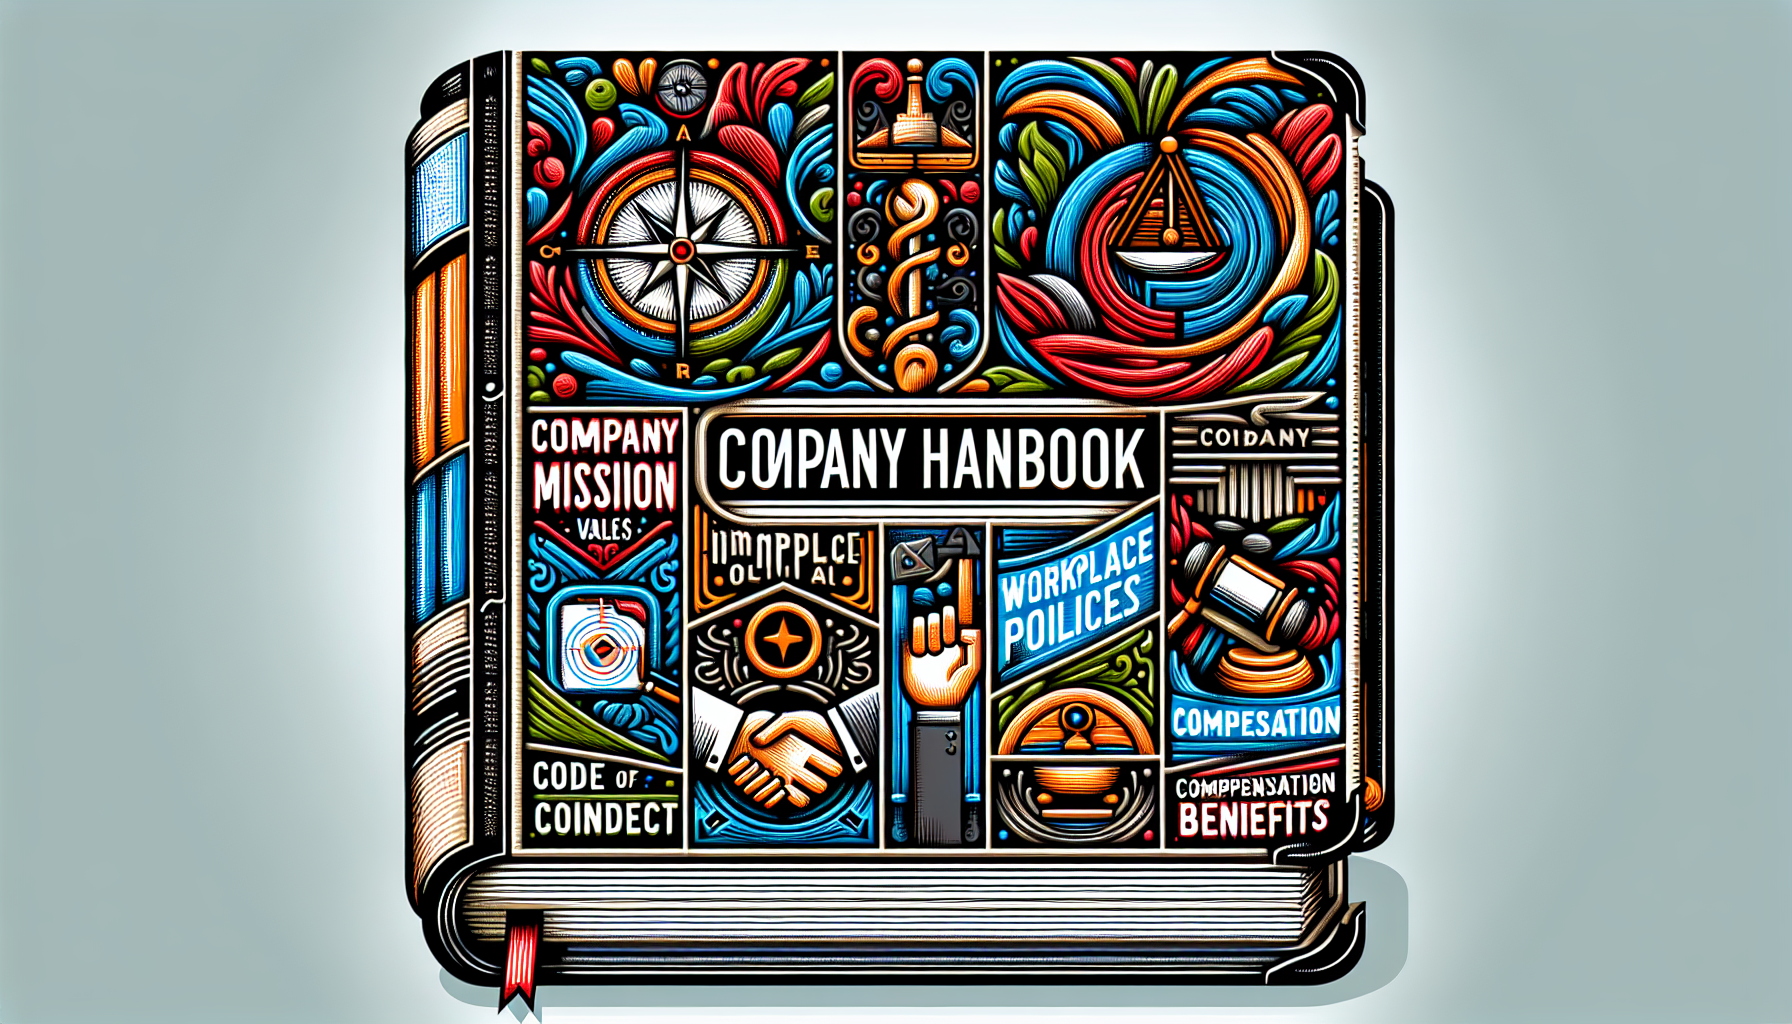 Illustration of a company handbook with essential elements